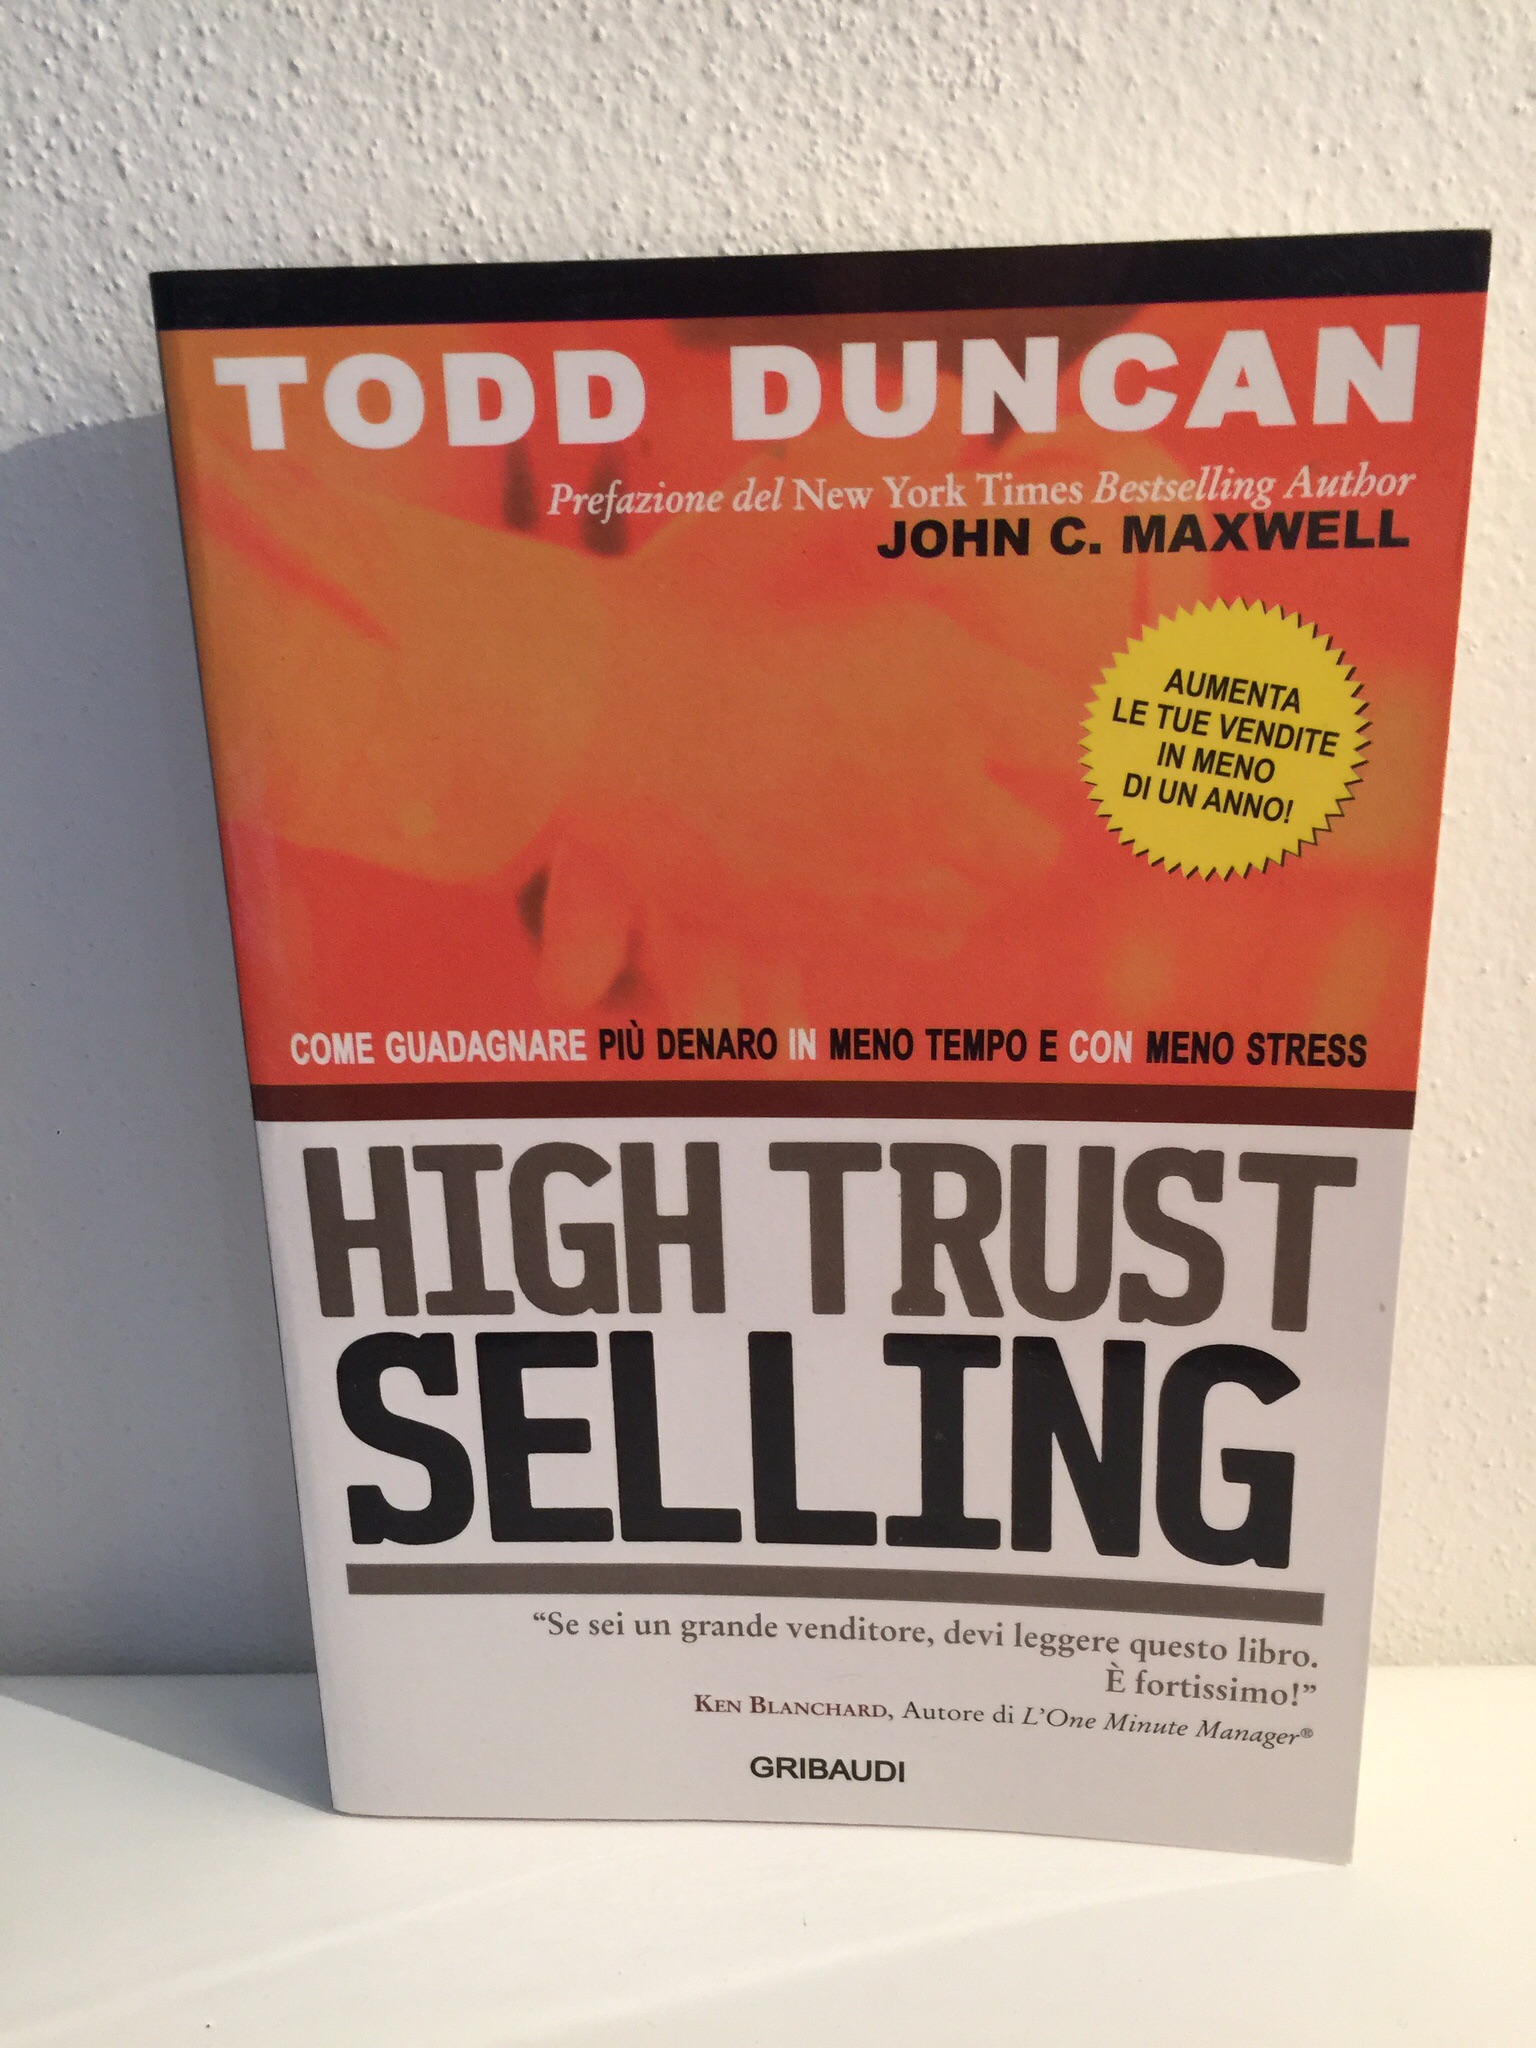 Hight trust selling – Todd Duncan